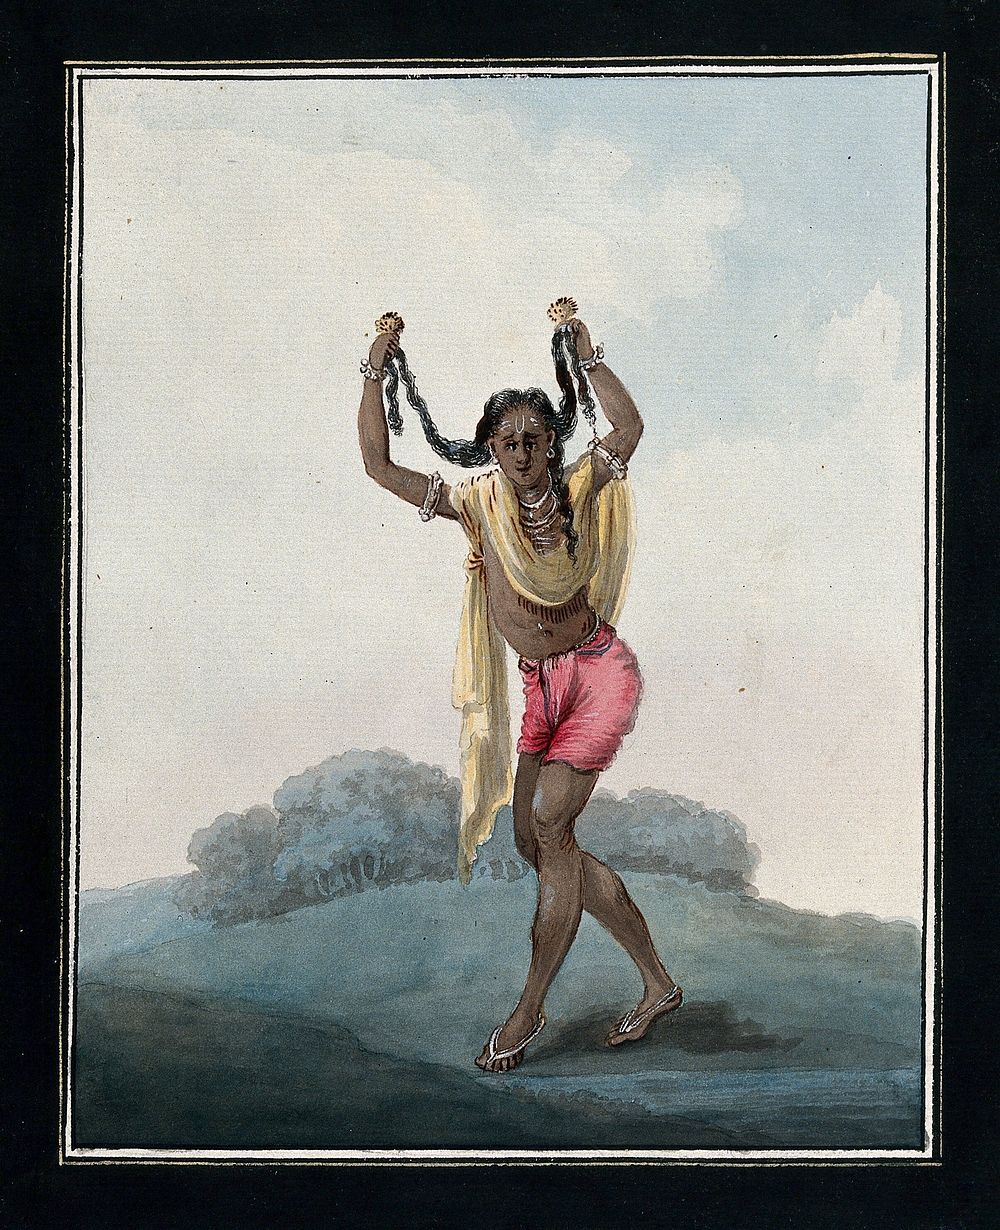 A performer; a man who enacts the female role. Gouache painting by an Indian artist.